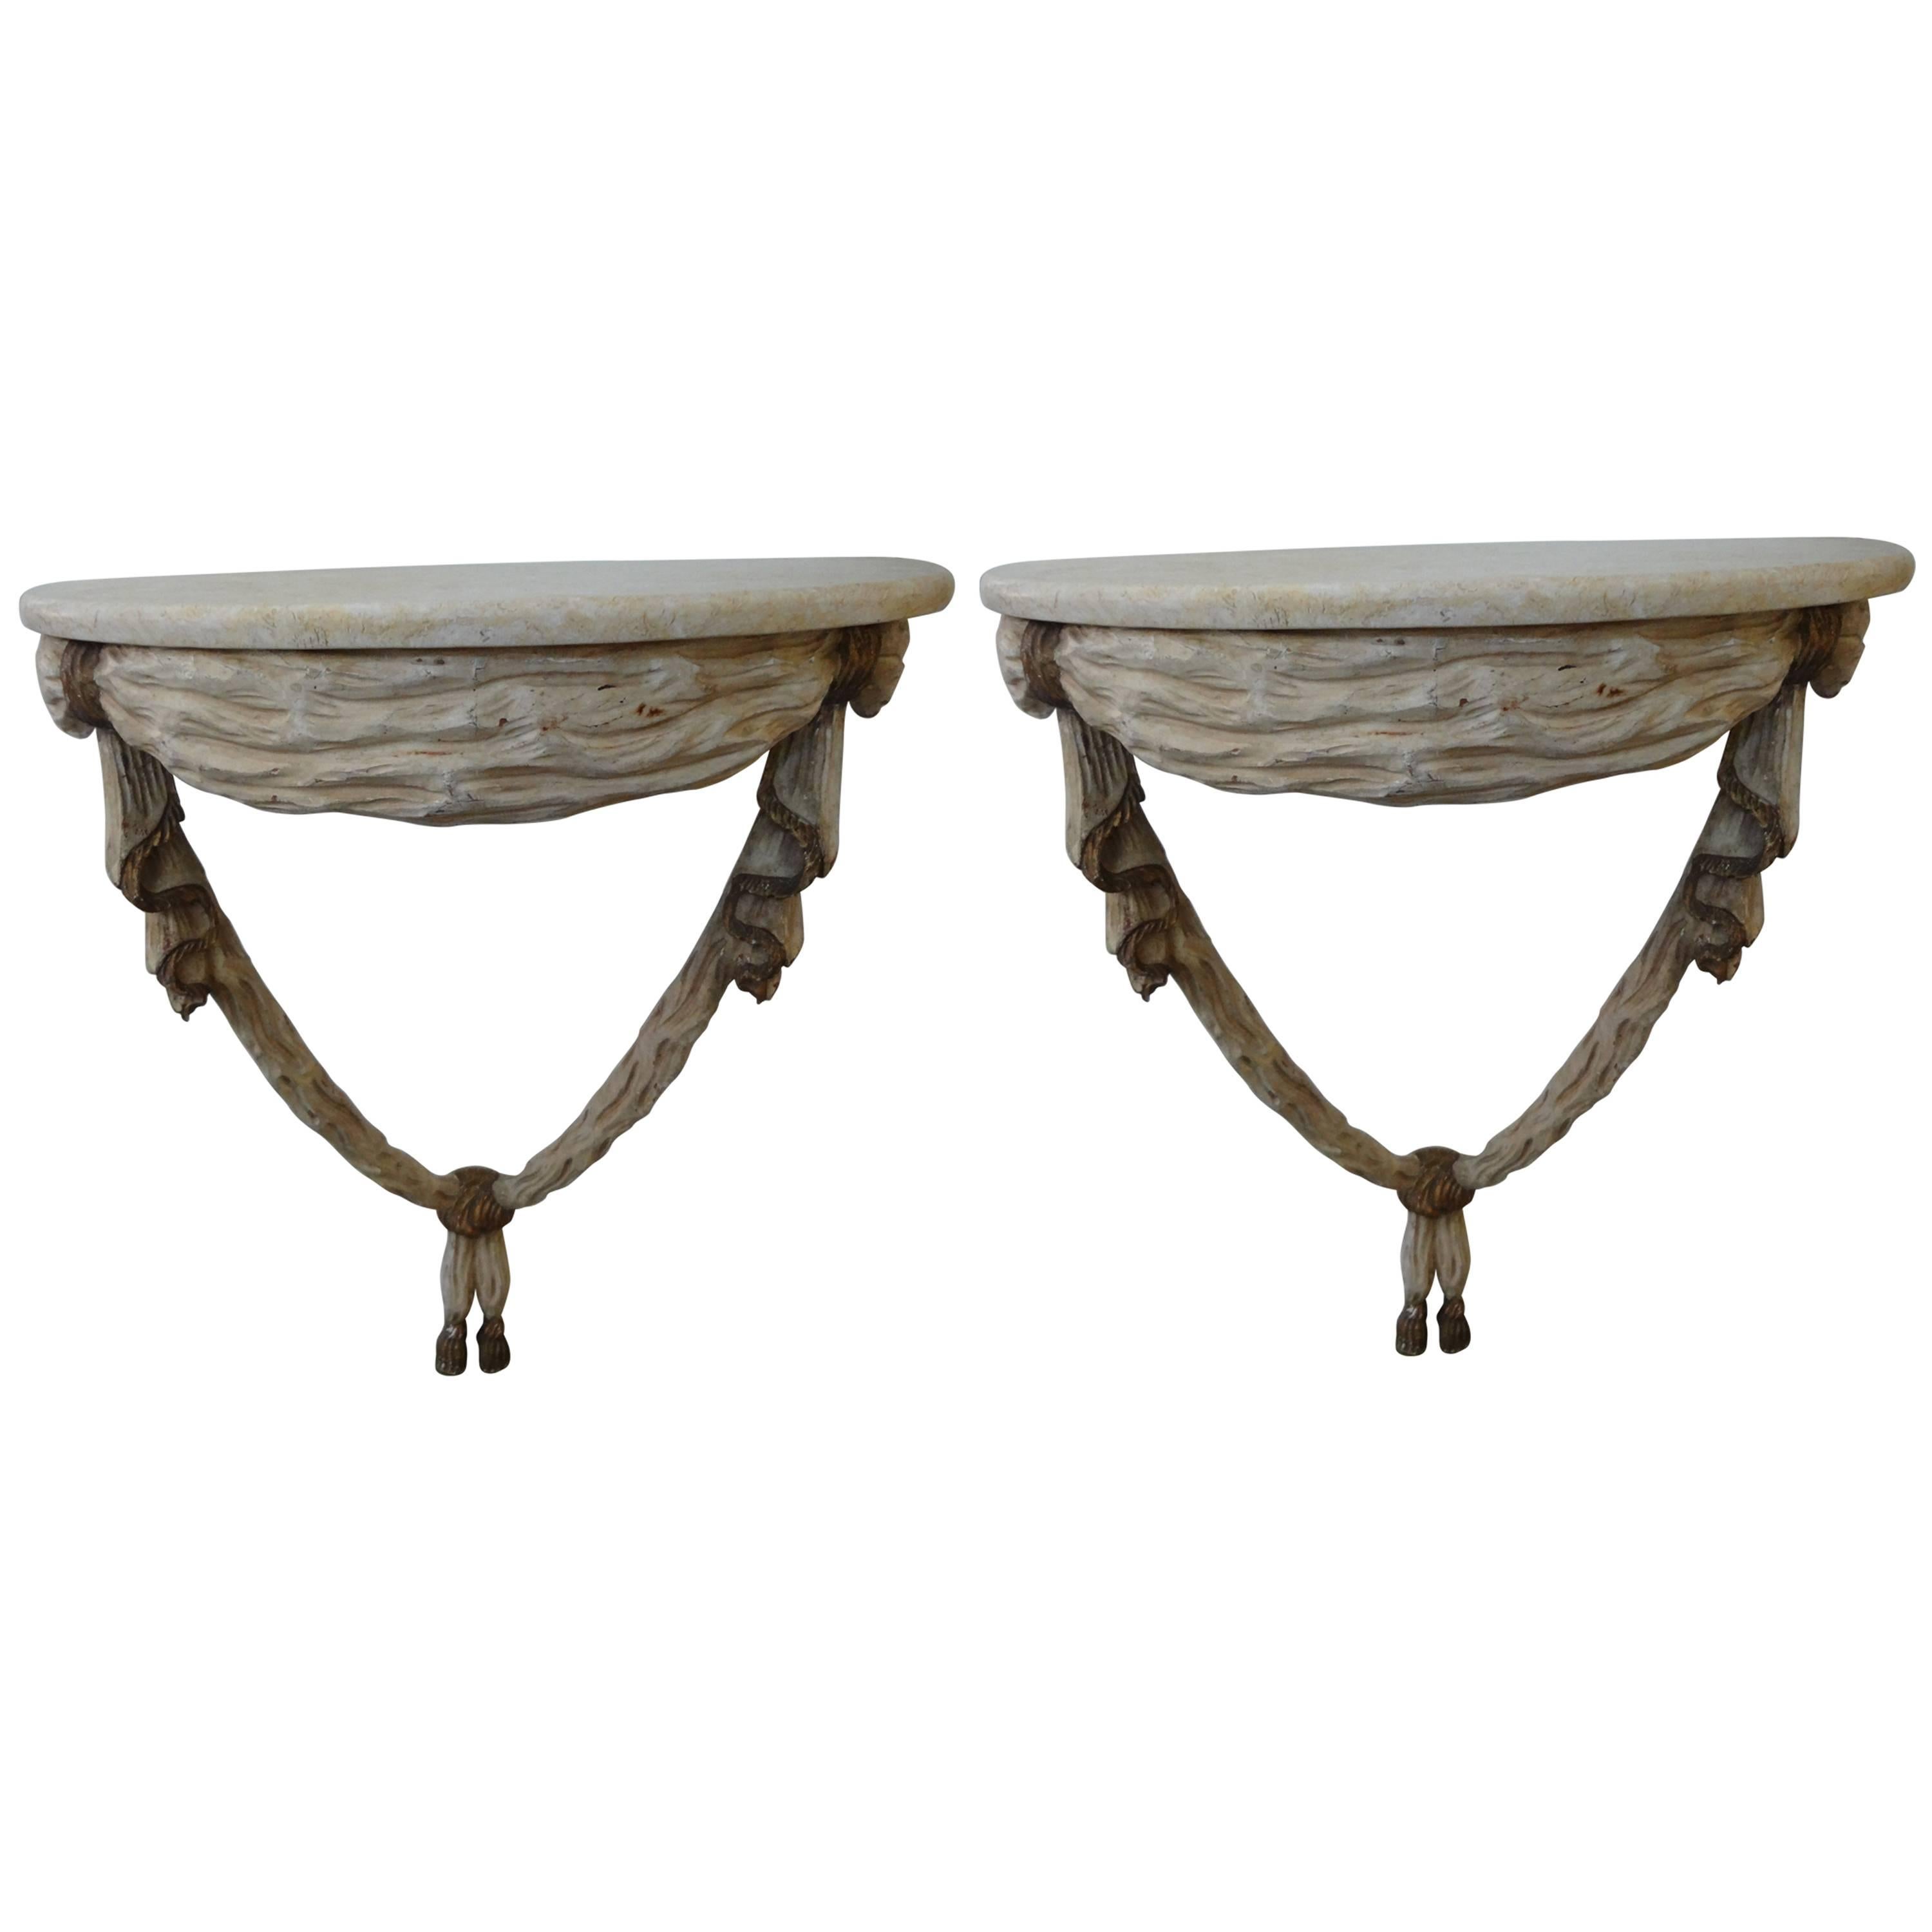 Pair of Italian Neoclassical Style Painted and Gilt Wood Console Tables